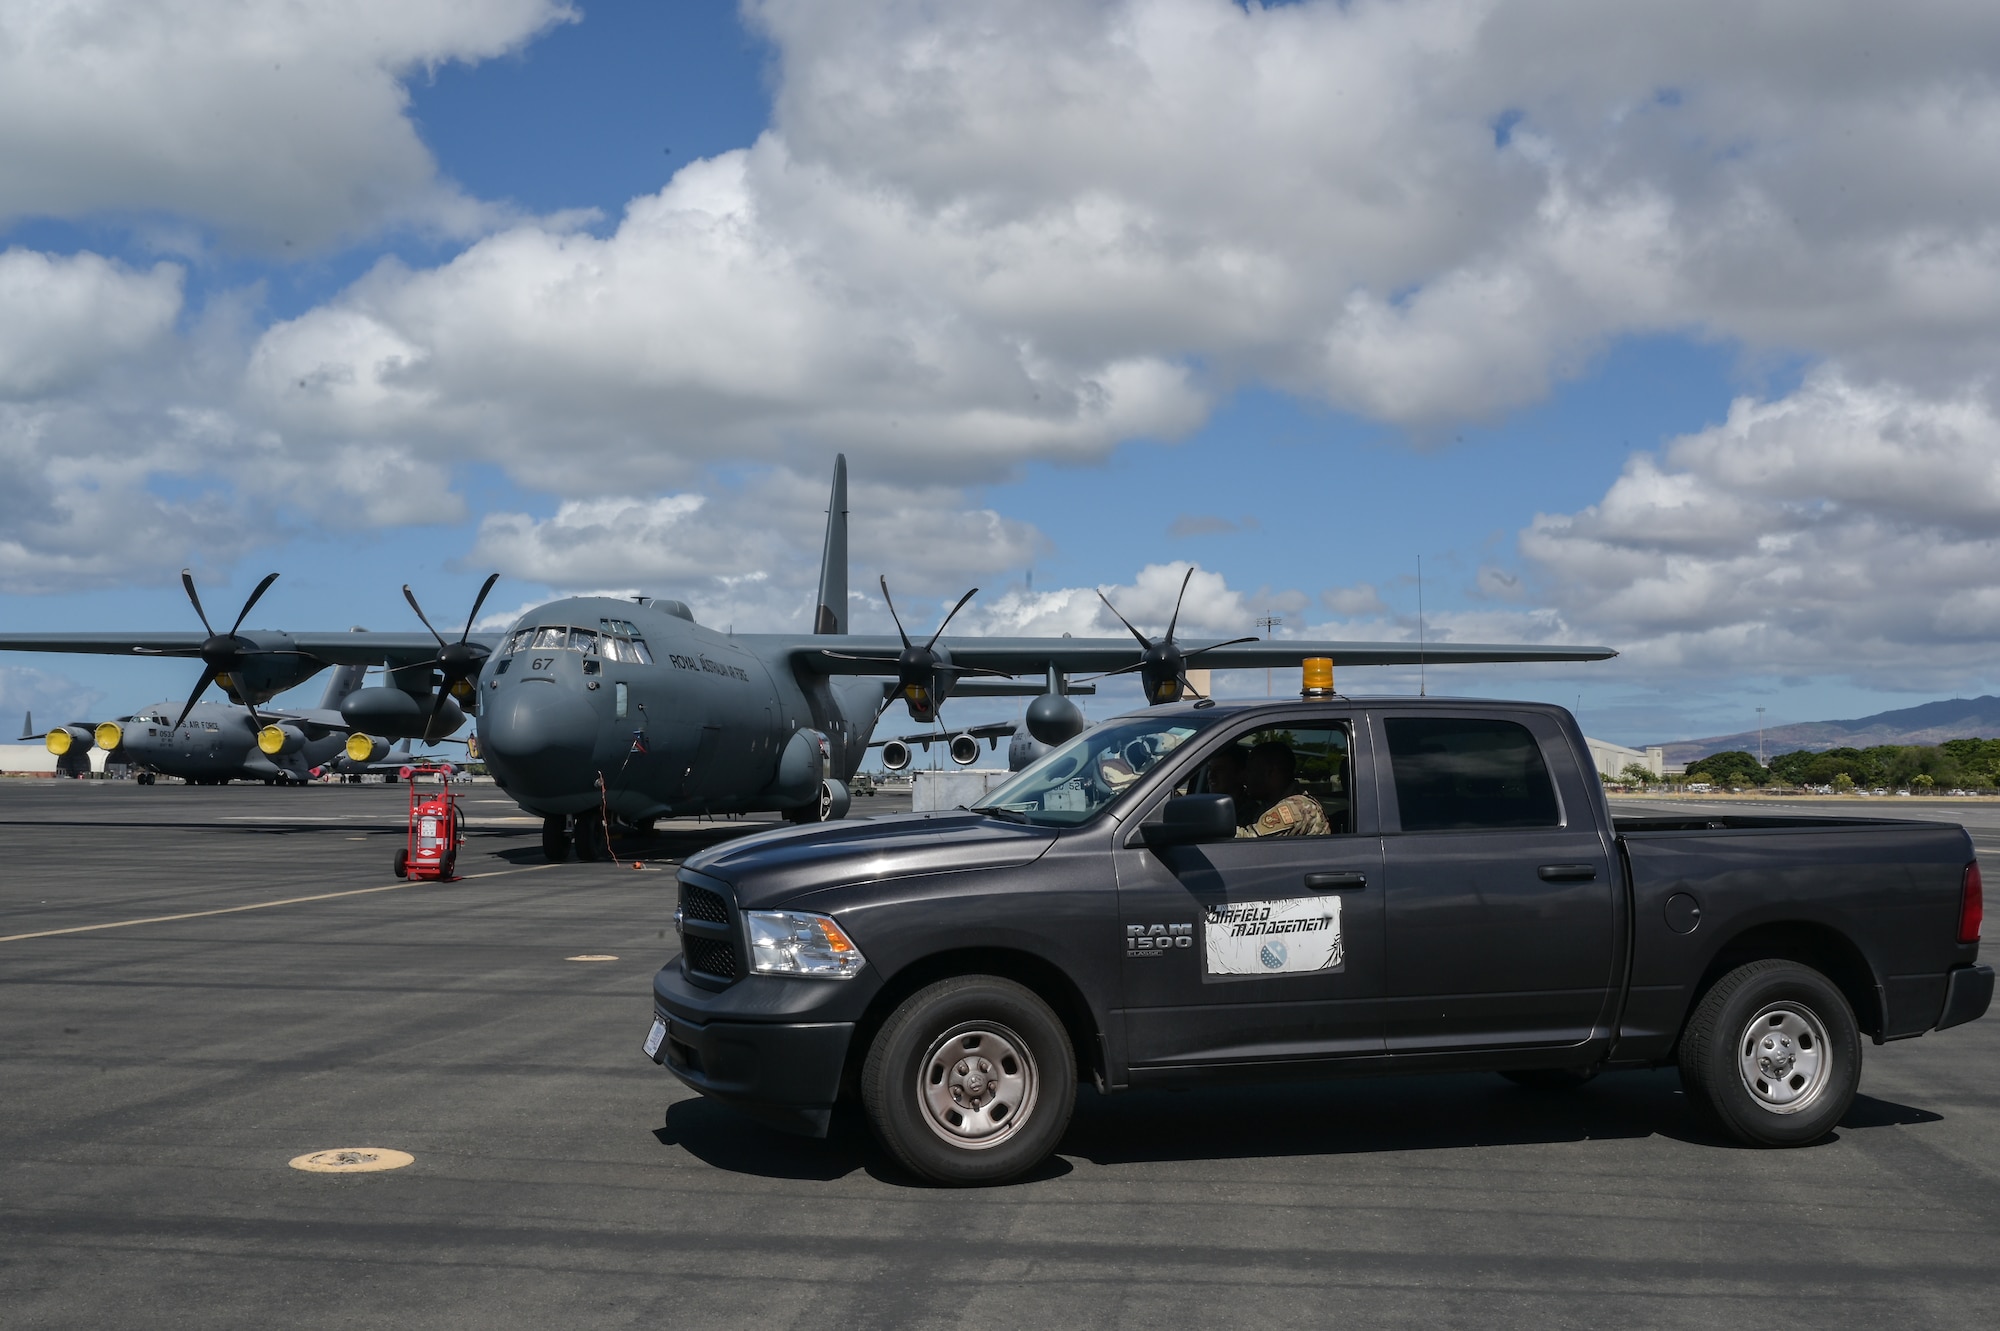 Senior Airman DeMarcus Evans and Airman 1st Class Millan Owens, 15th Operations Support Squadron airfield management journeymen, inspect a parked Royal Australian Air Force C-130 Hercules during Rim of the Pacific Exercise 2022 at Joint Base Pearl Harbor-Hickam, Hawaii, June 25, 2022. The flight’s workload of creating flight and parking plans is increased with the addition of nearly 25,000 additional personnel participating in the exercises. (U.S. Air Force photo by Staff Sgt. Alan Ricker)